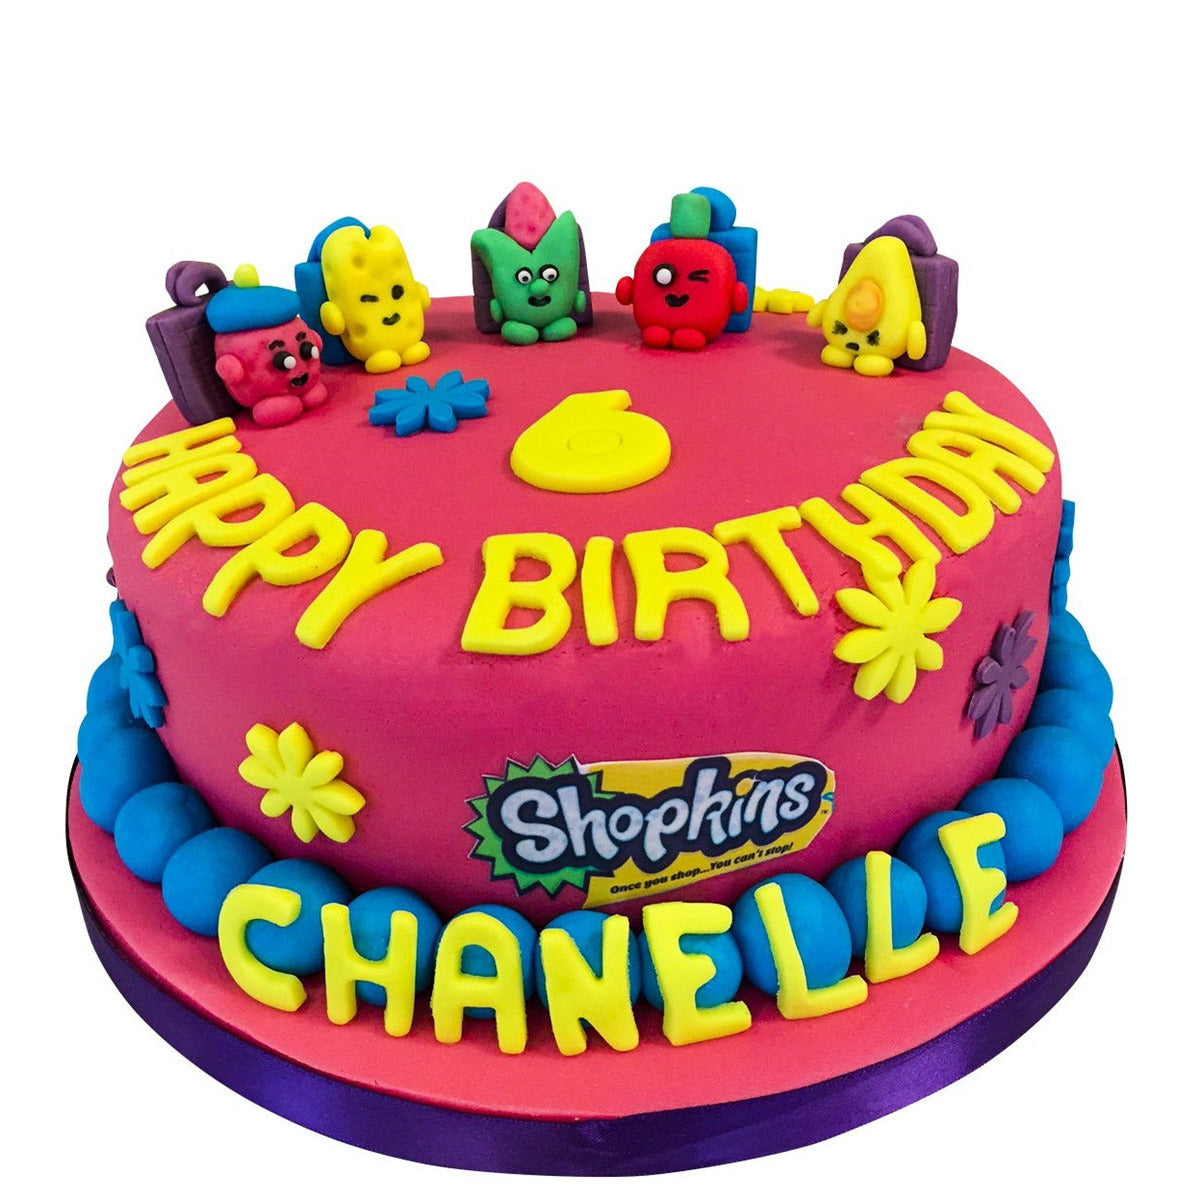 Shopkins Cake - Buy Online, Free UK Delivery New Cakes